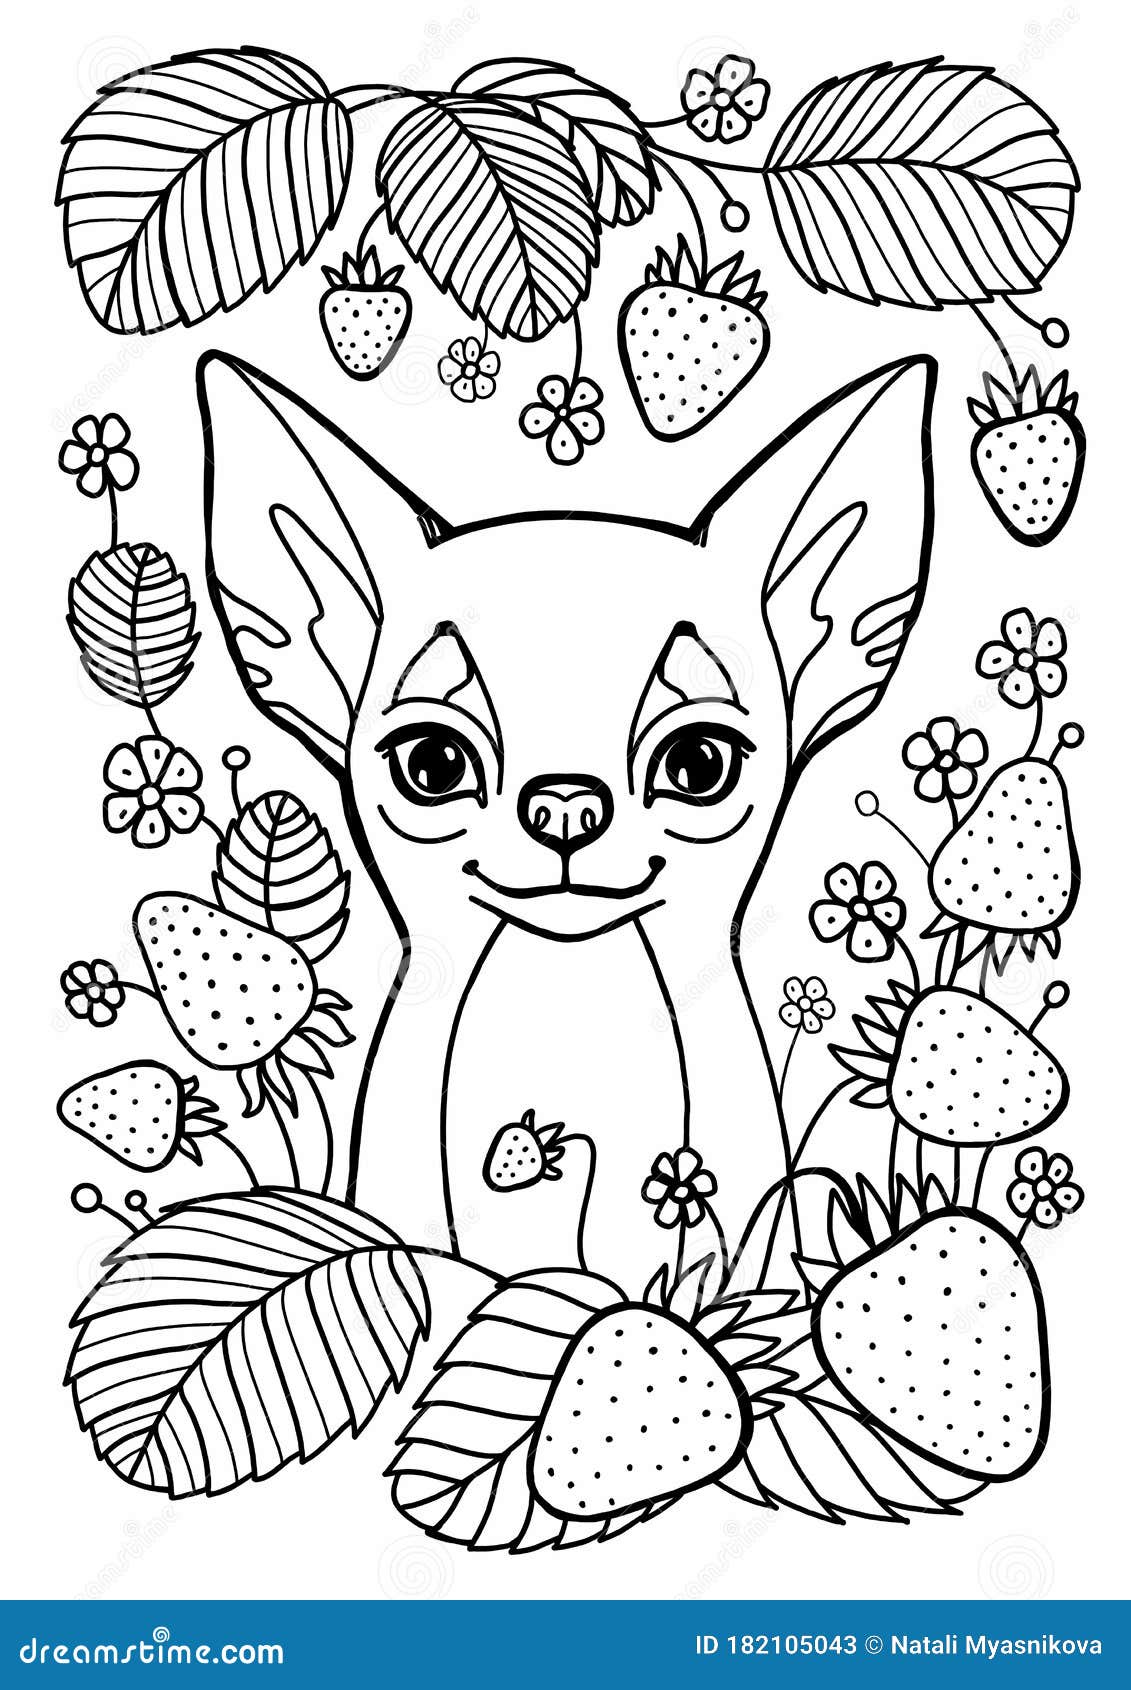 Coloring Page. Lovely Dog with Heart for Valentines Day Card. Anti ...